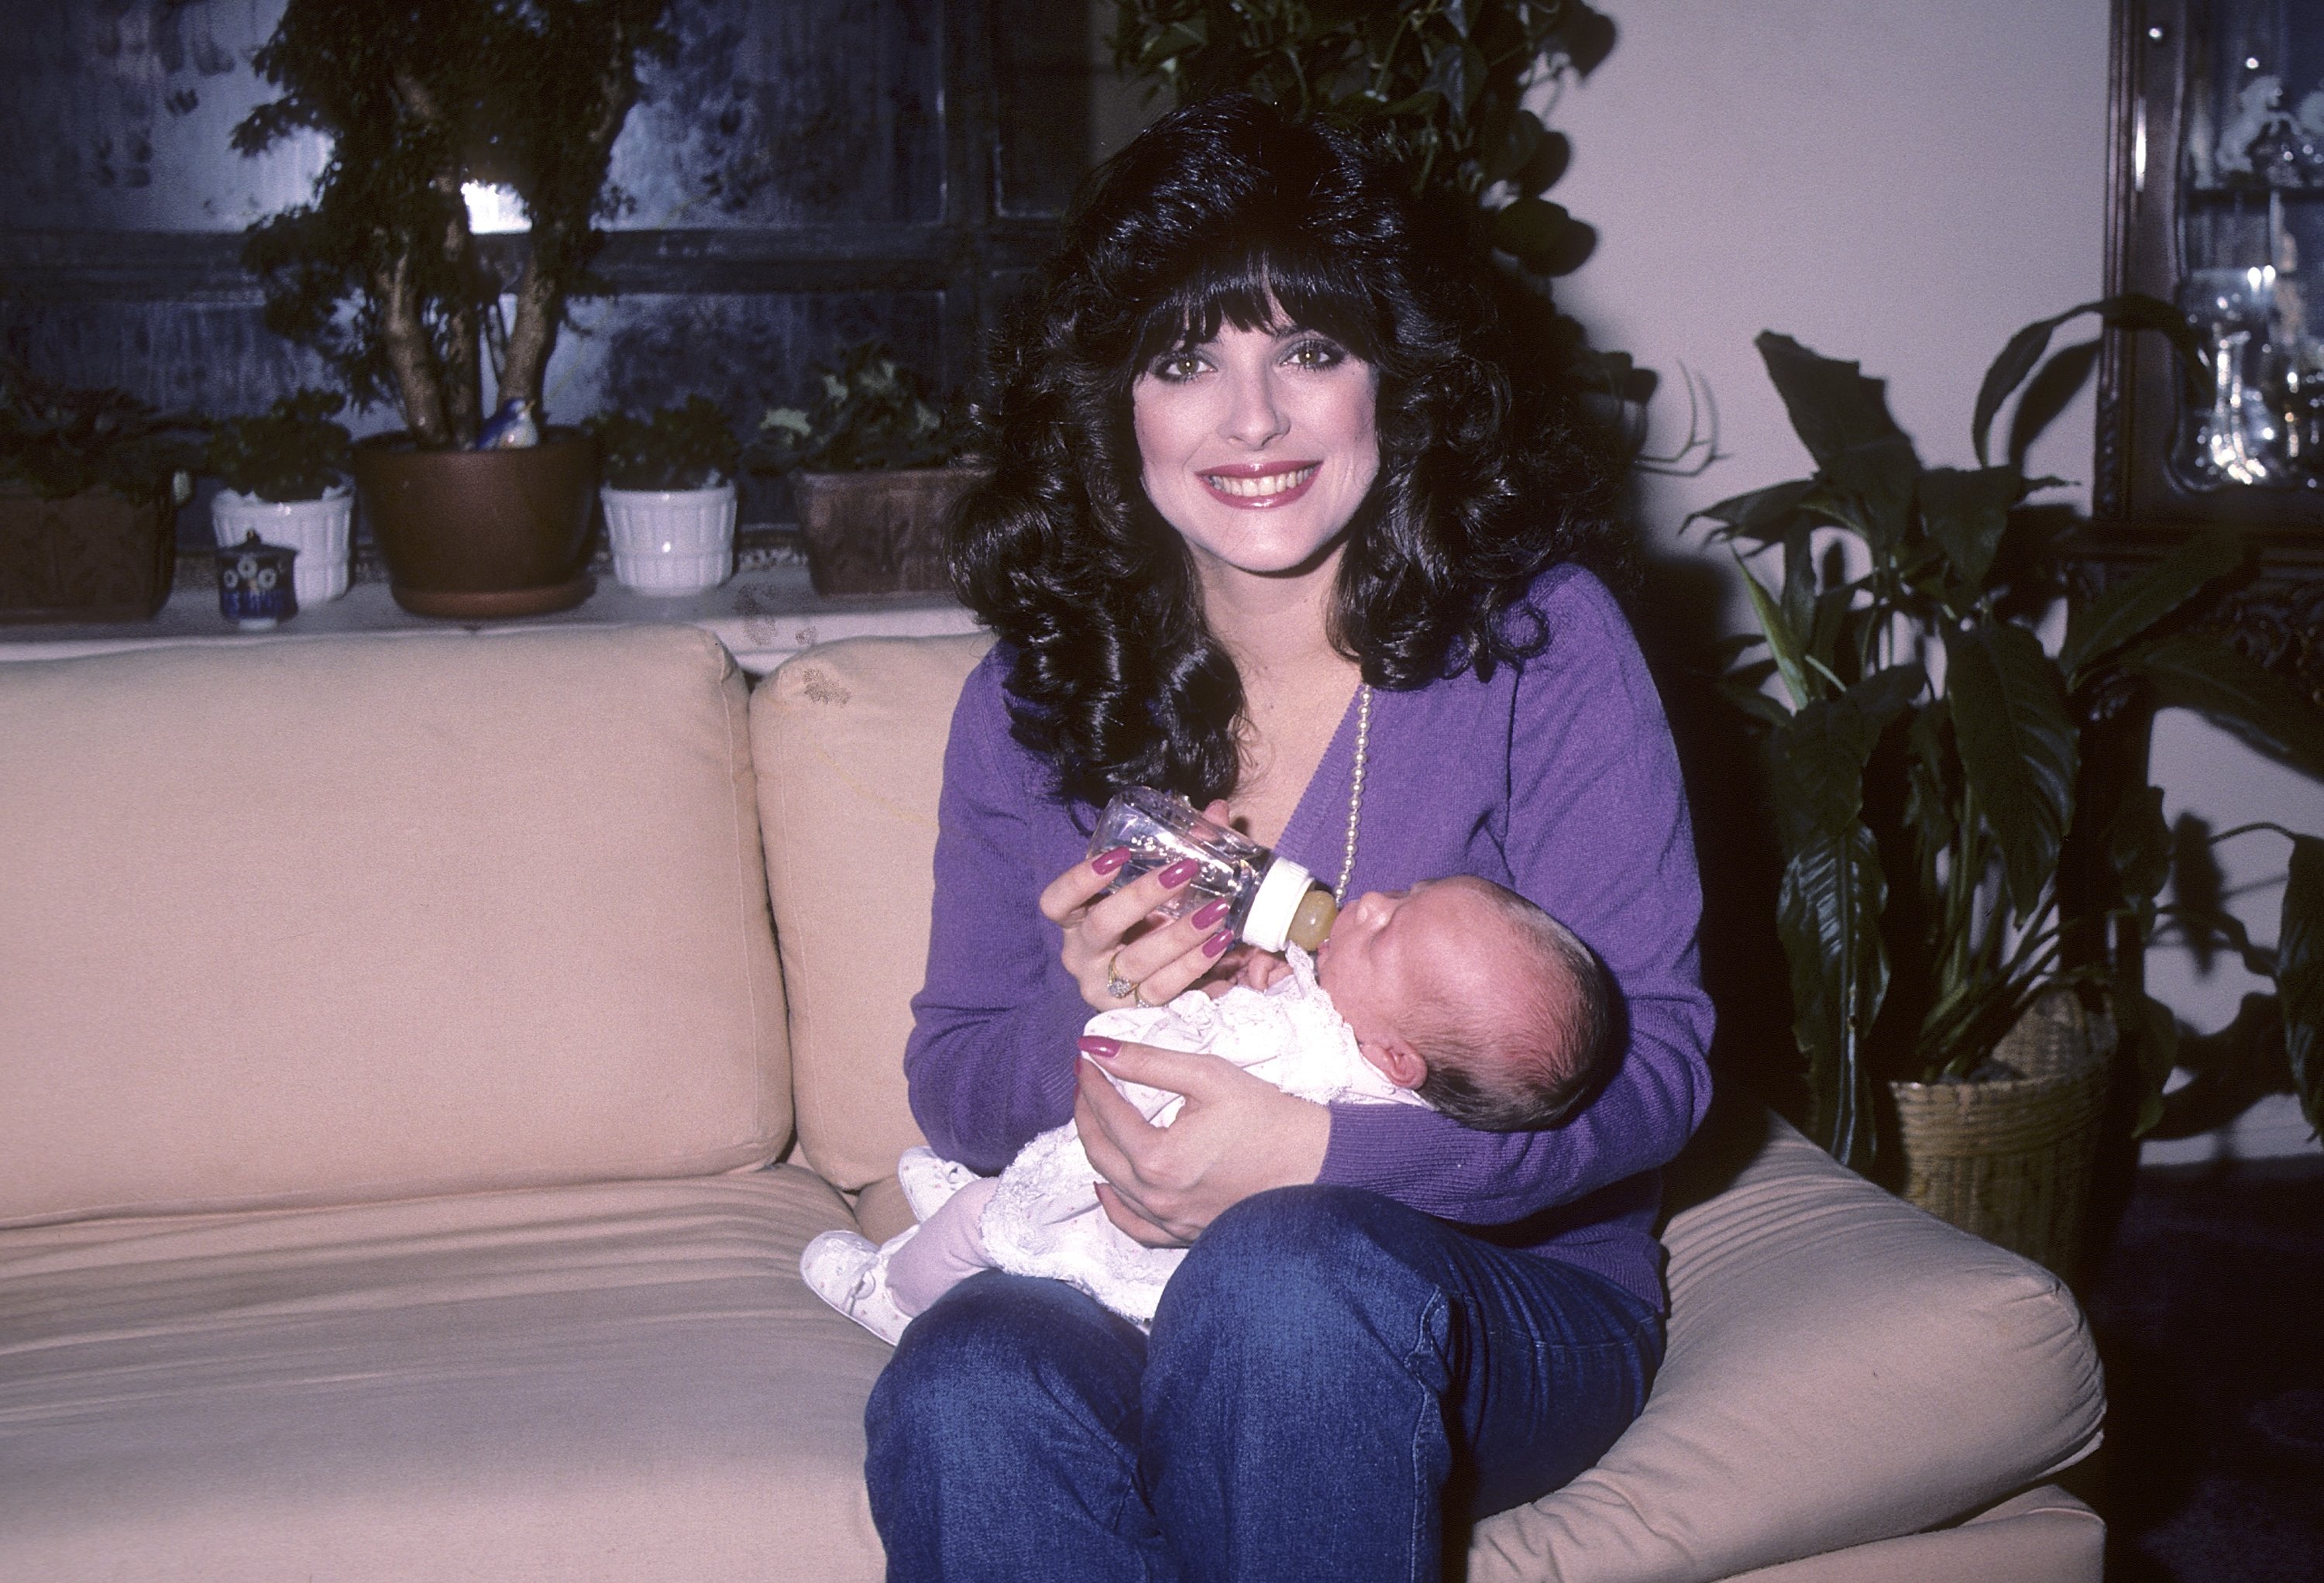 Lisa Loring holds her newly born daughter, Marianne Stevenson, on January 31, 1984, at her apartment in New York City. | Source: Getty Images